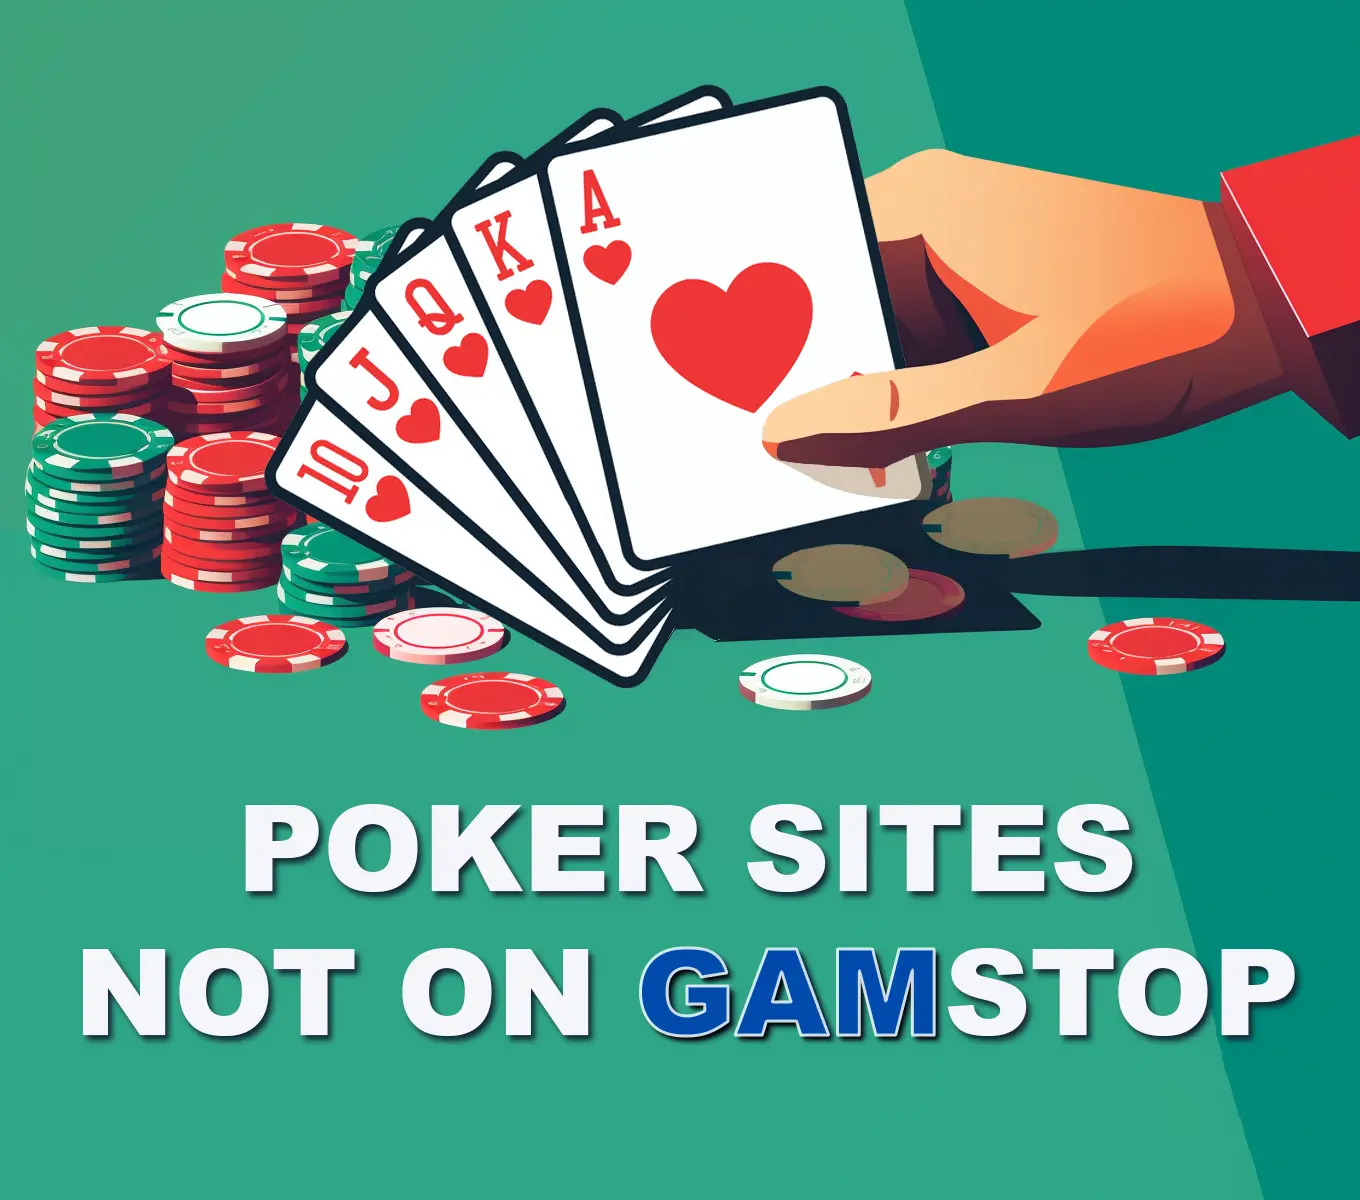 Poker sites not on Gamstop